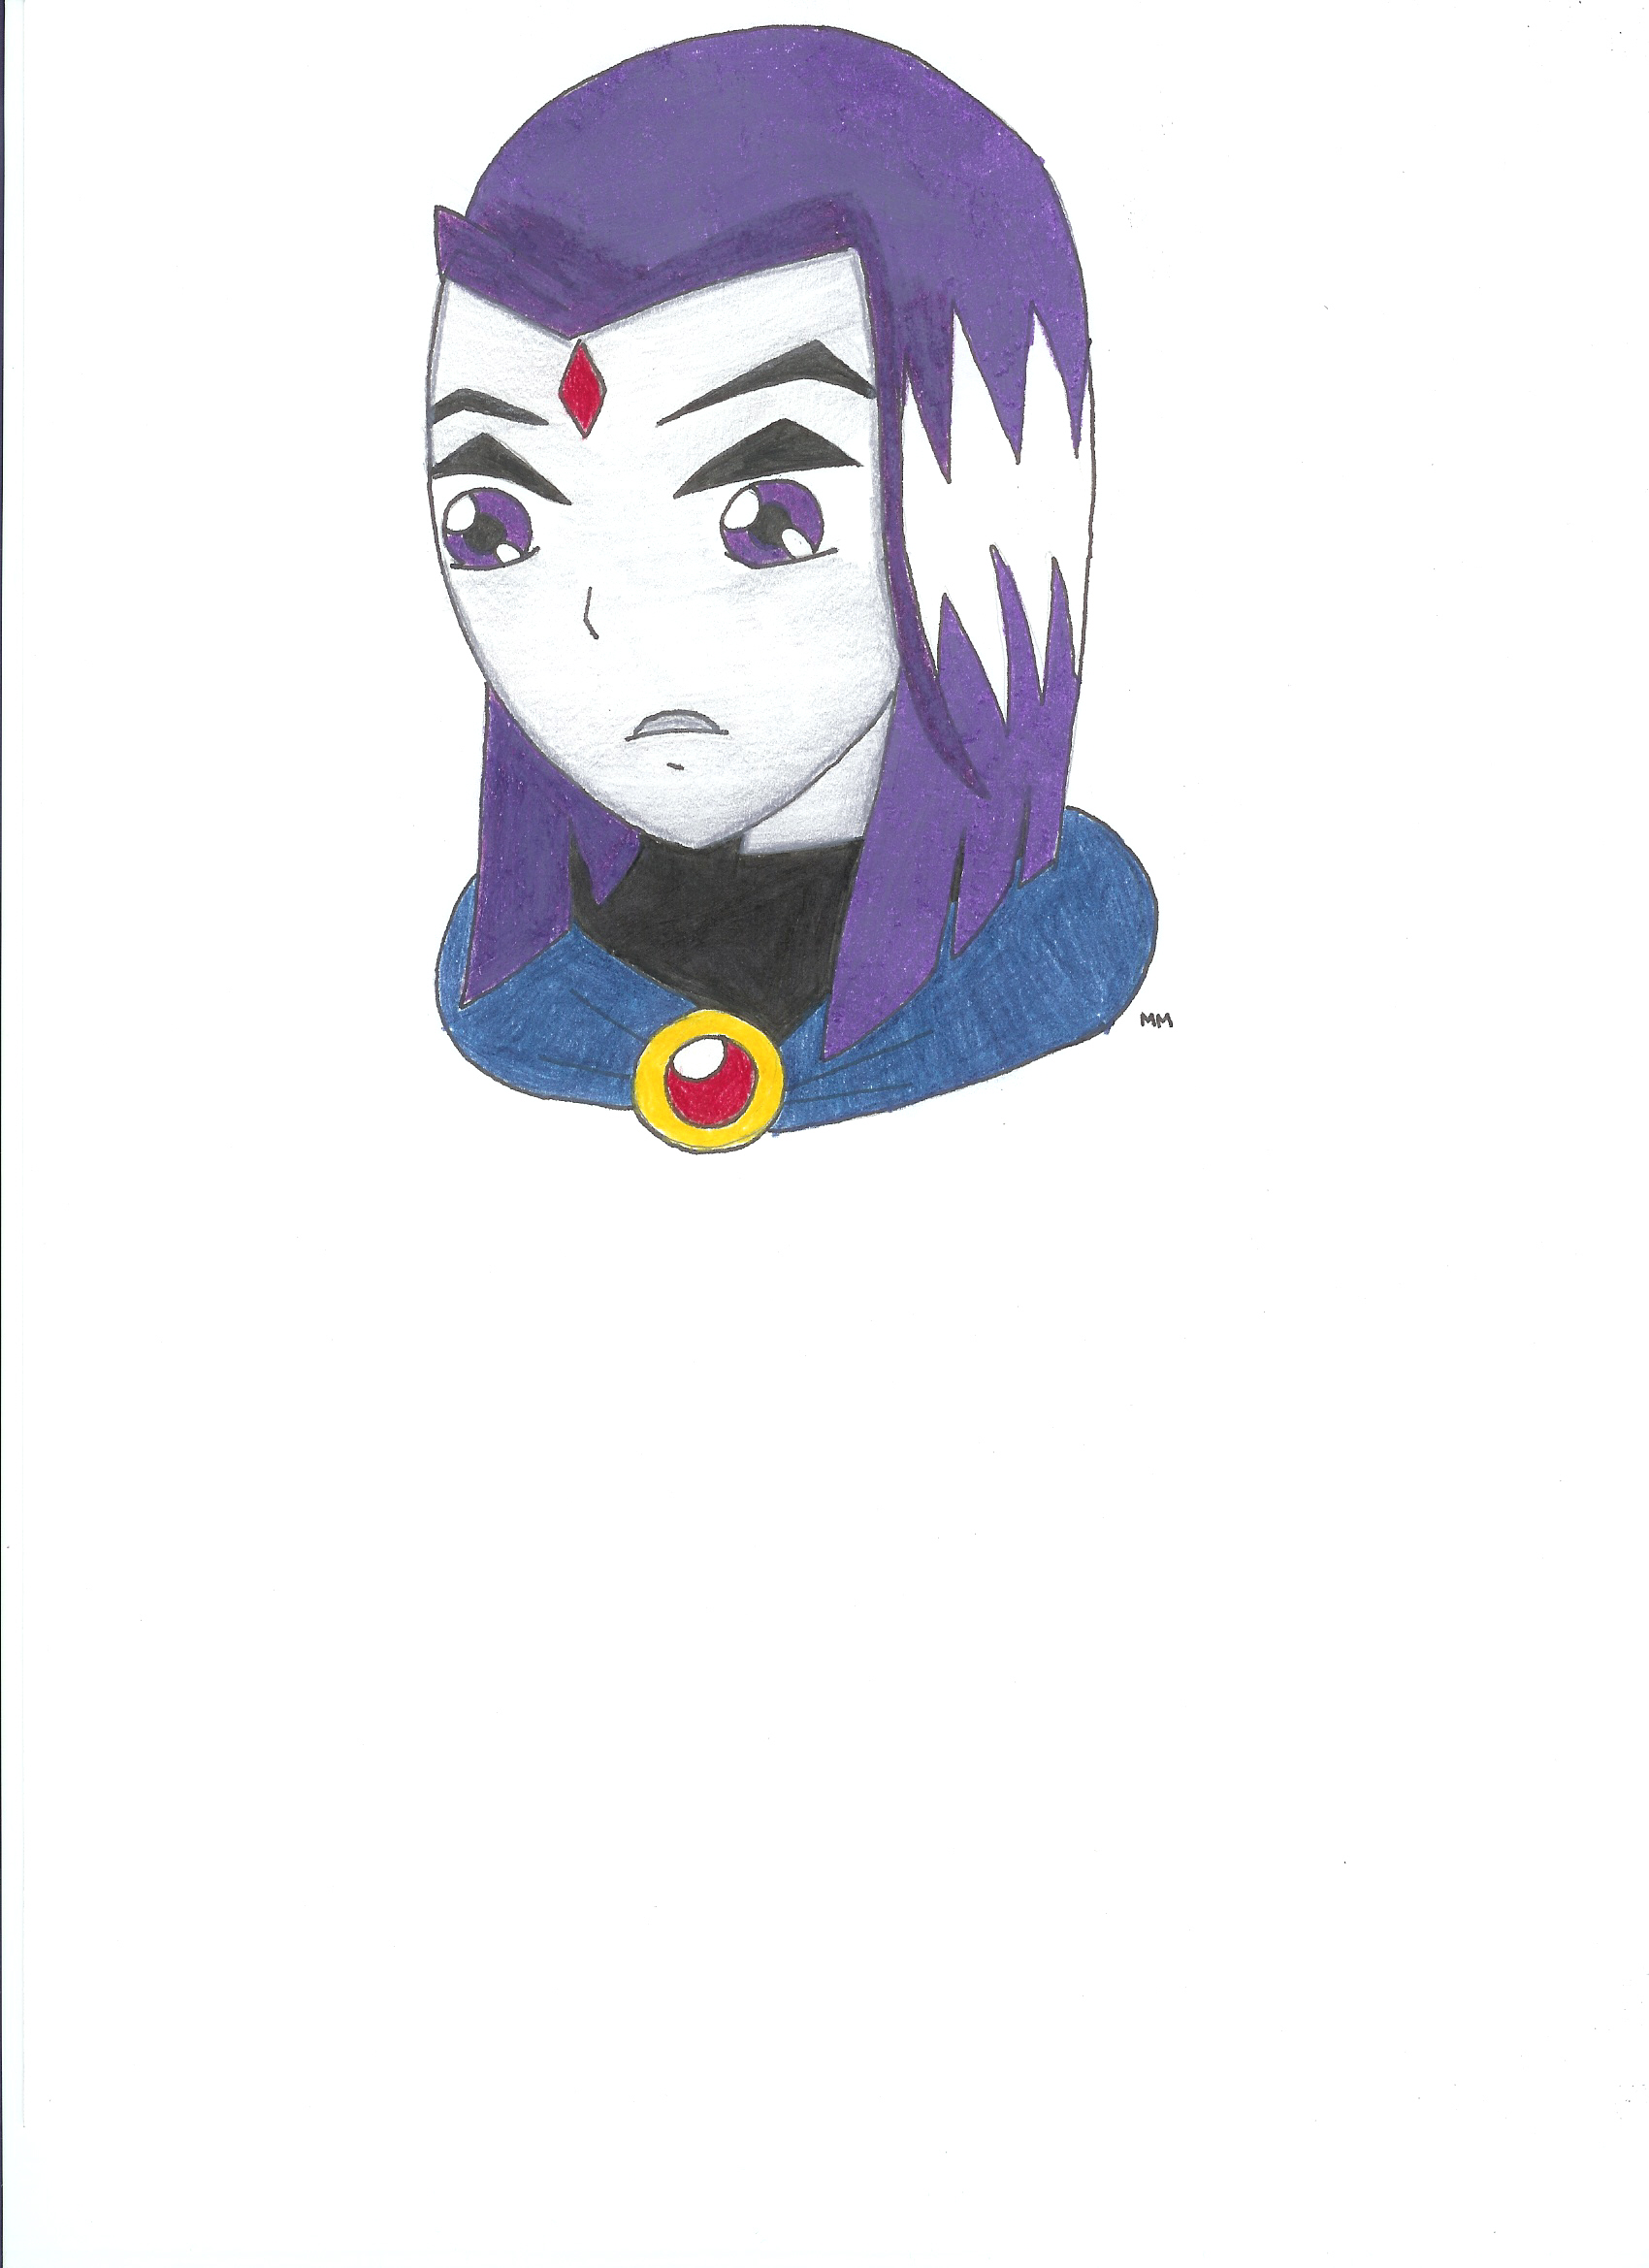 Raven [Without the hood] by InvaderAvatarTitan13